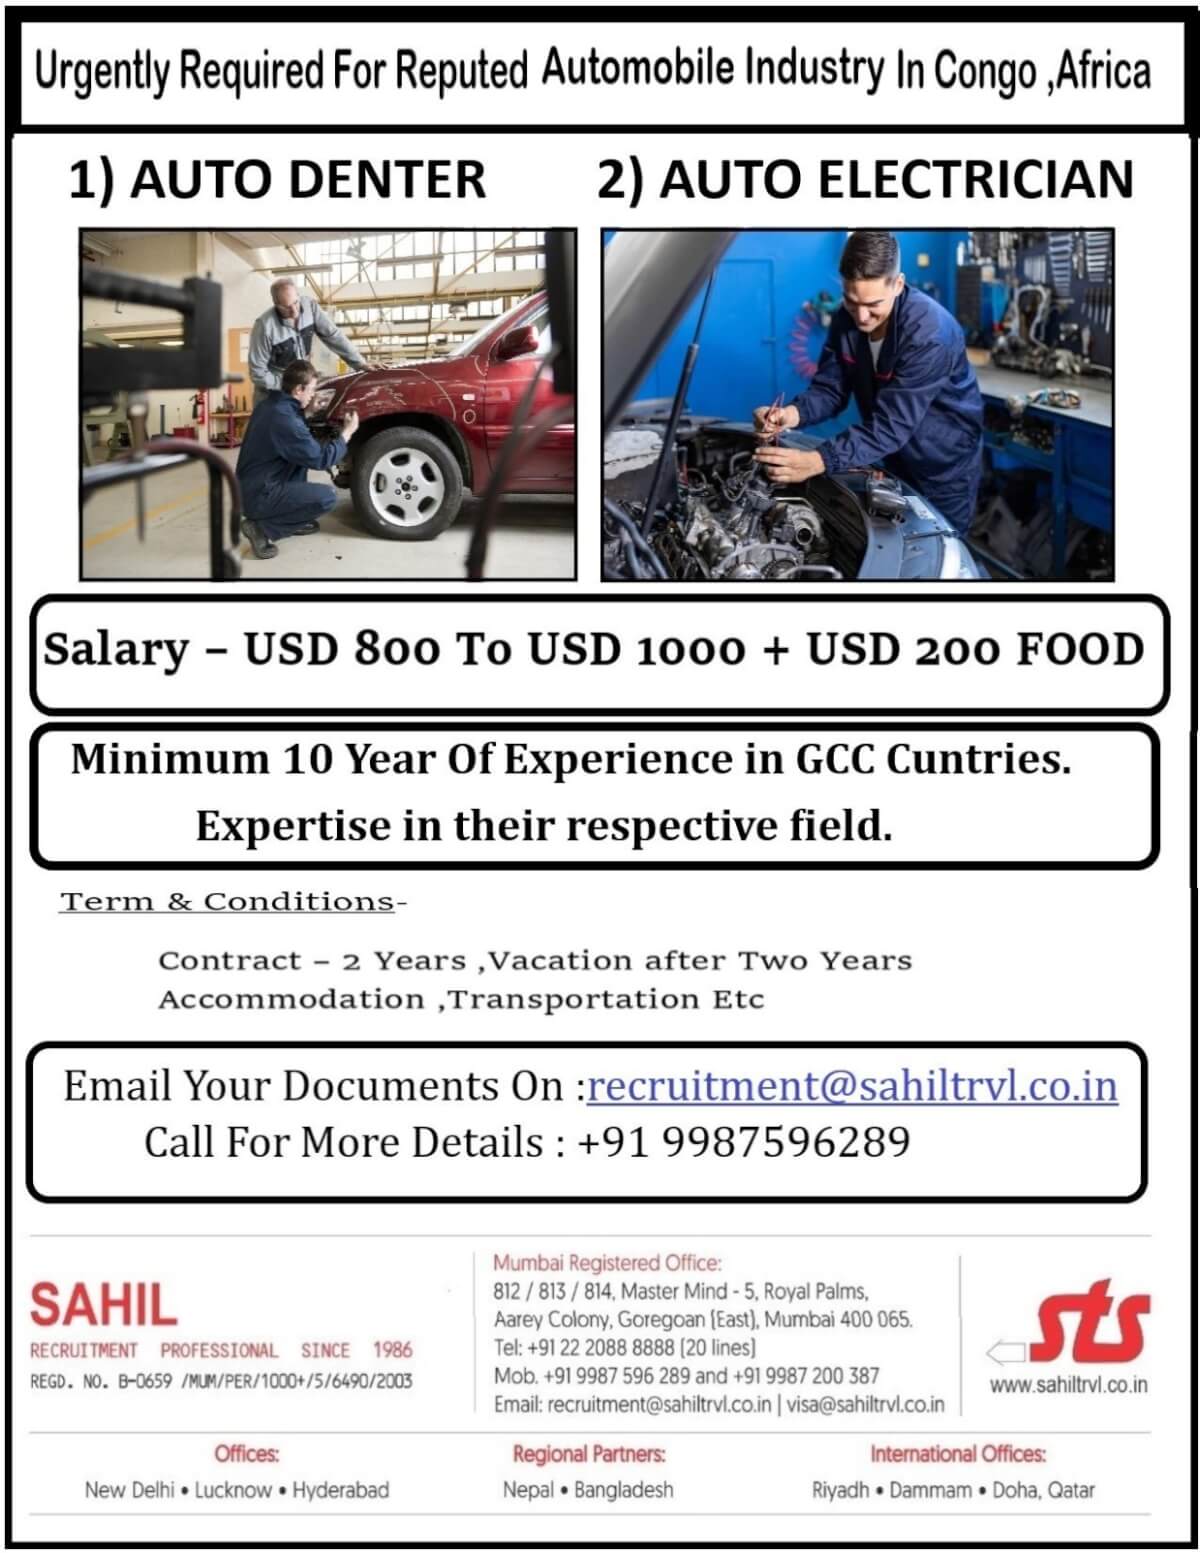 URGENTLY REQUIRED FOR REPUTED AUTOMOBILE INDUSTRY IN CONGO , AFRICA